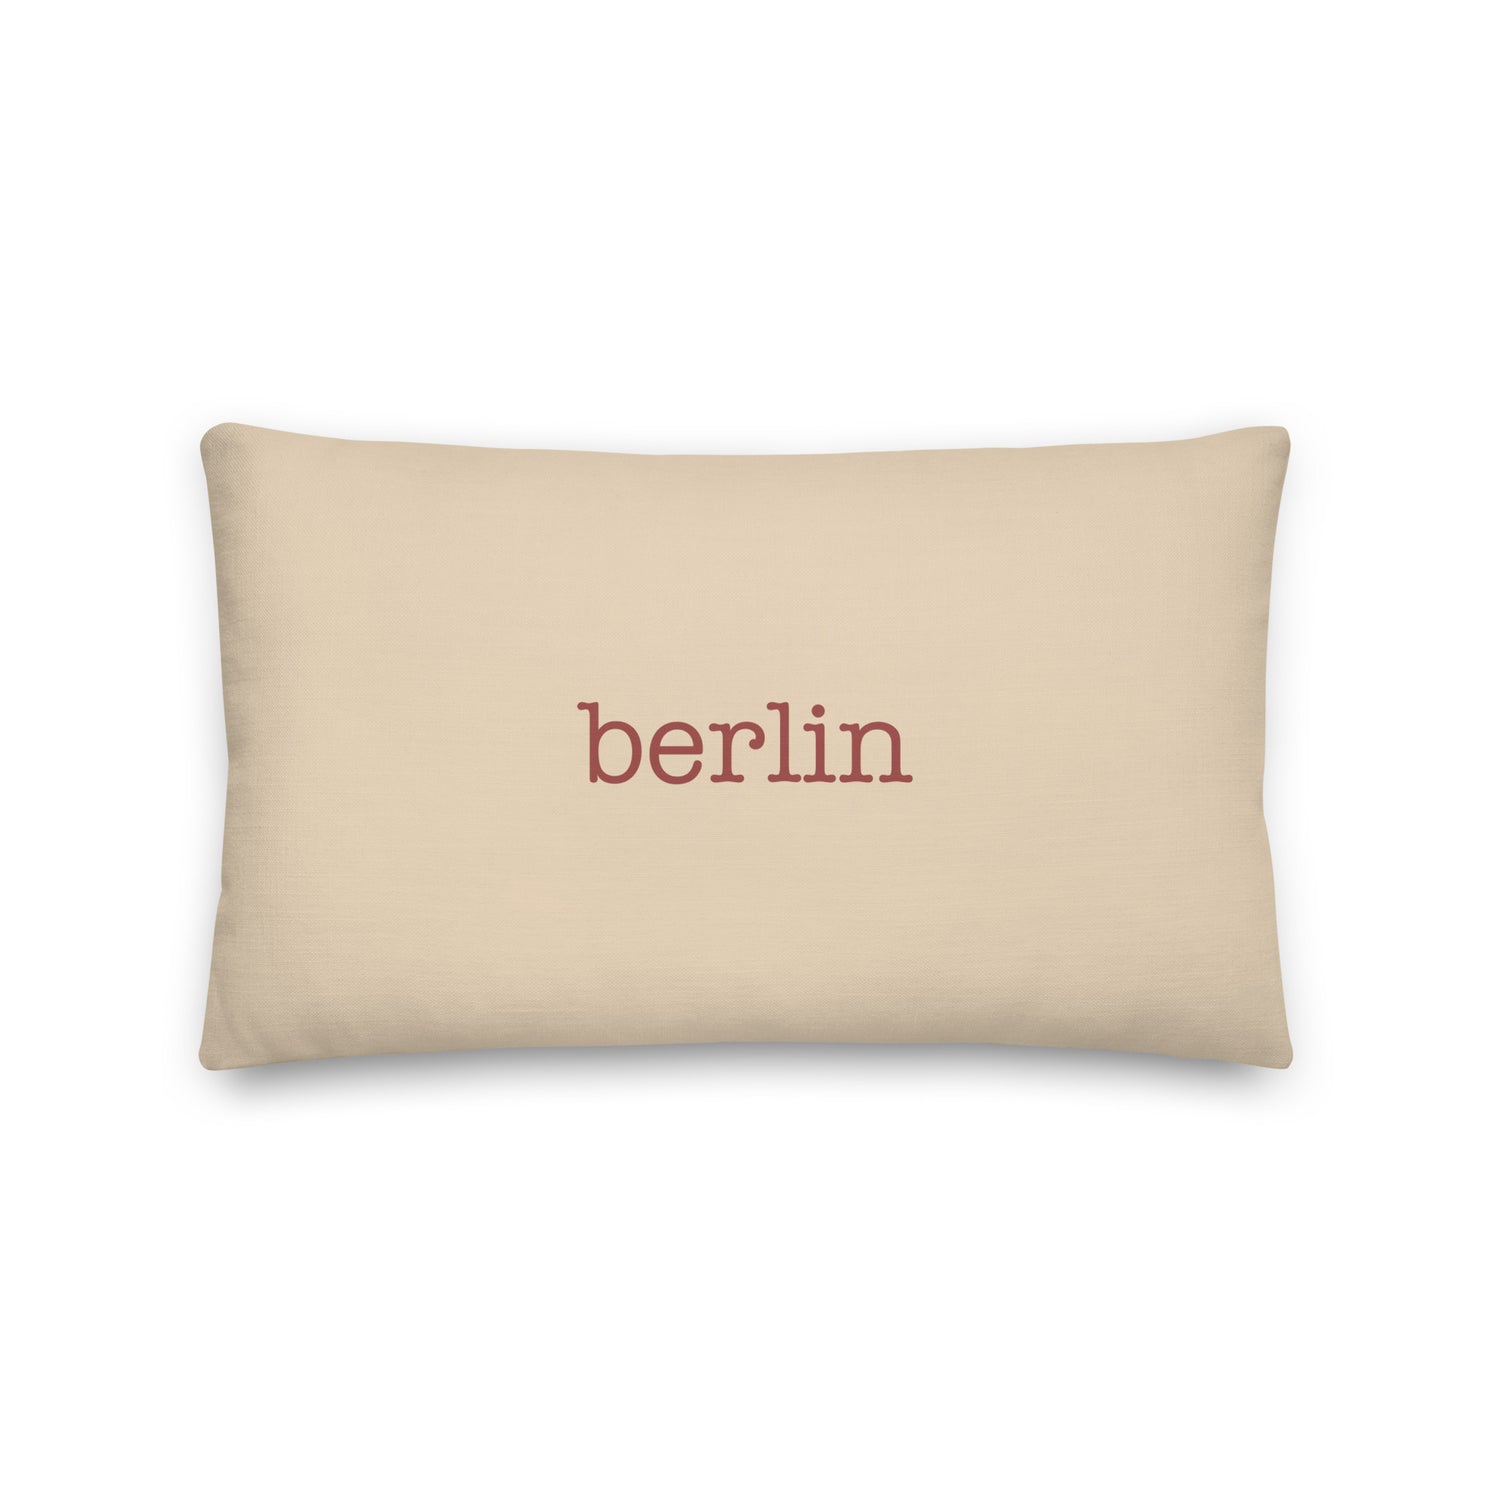 Berlin Germany Pillows and Blankets • BER Airport Code